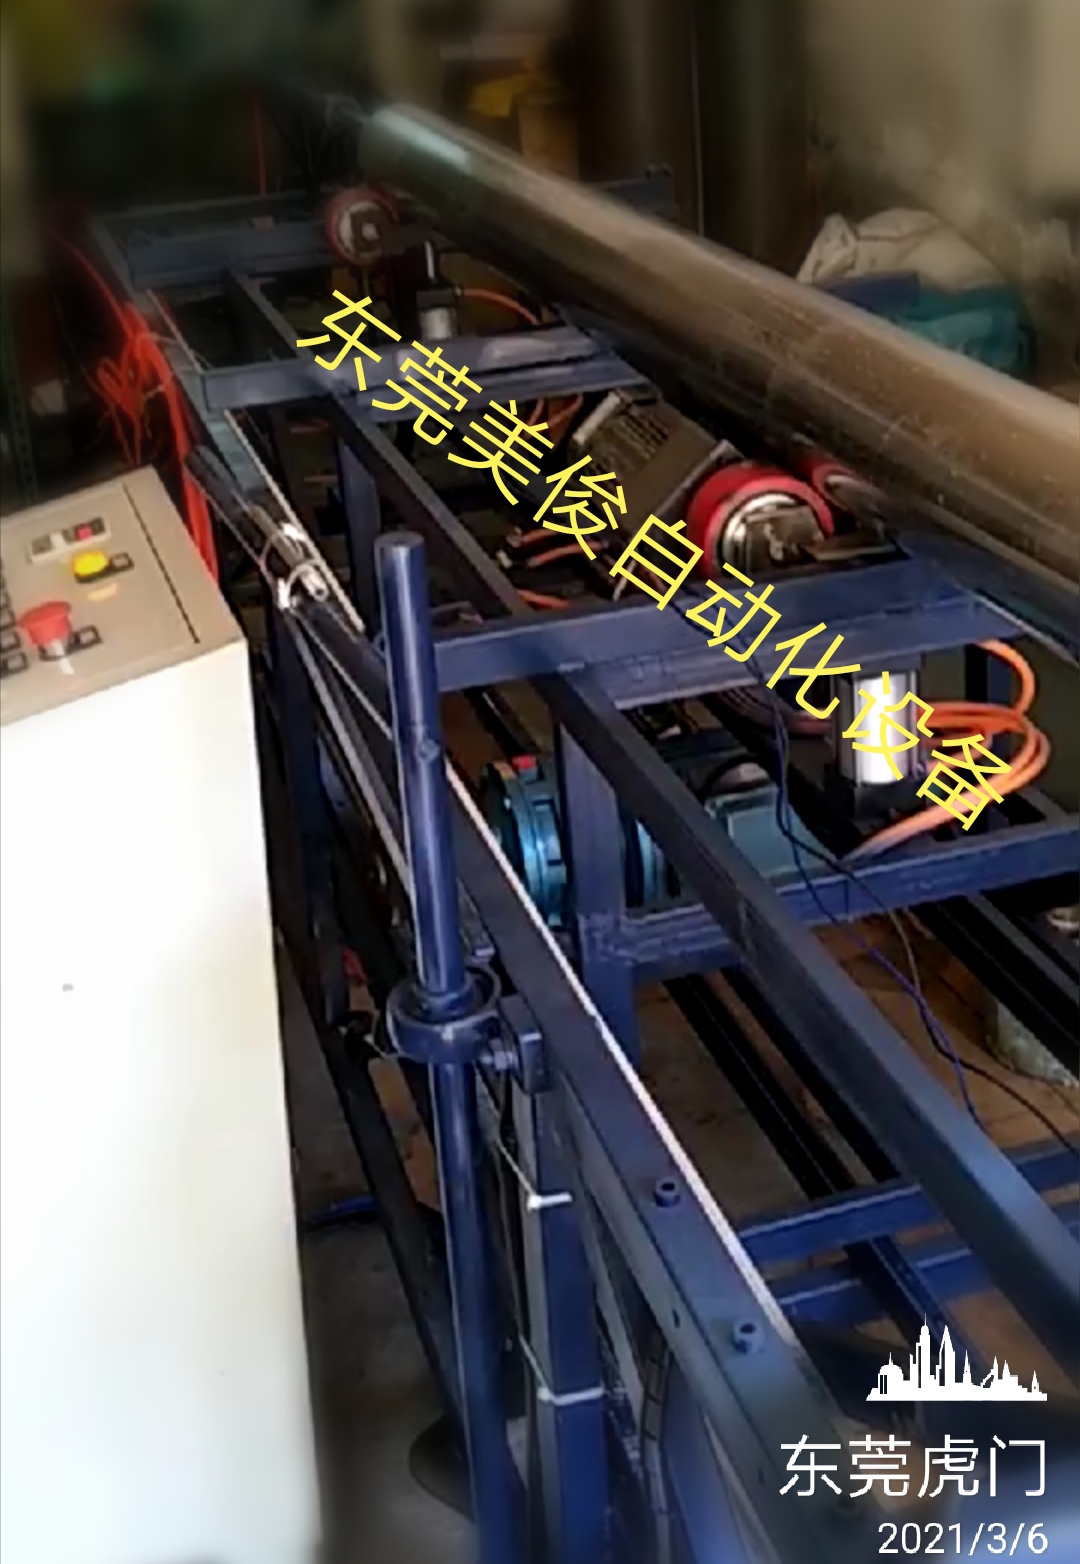 Sandblasting machine for pipe inner wall rust removal, pipe automatic spraying Sand machine, pipeline inner wall sandblasting machine, pipeline external automatic sandblasting machine